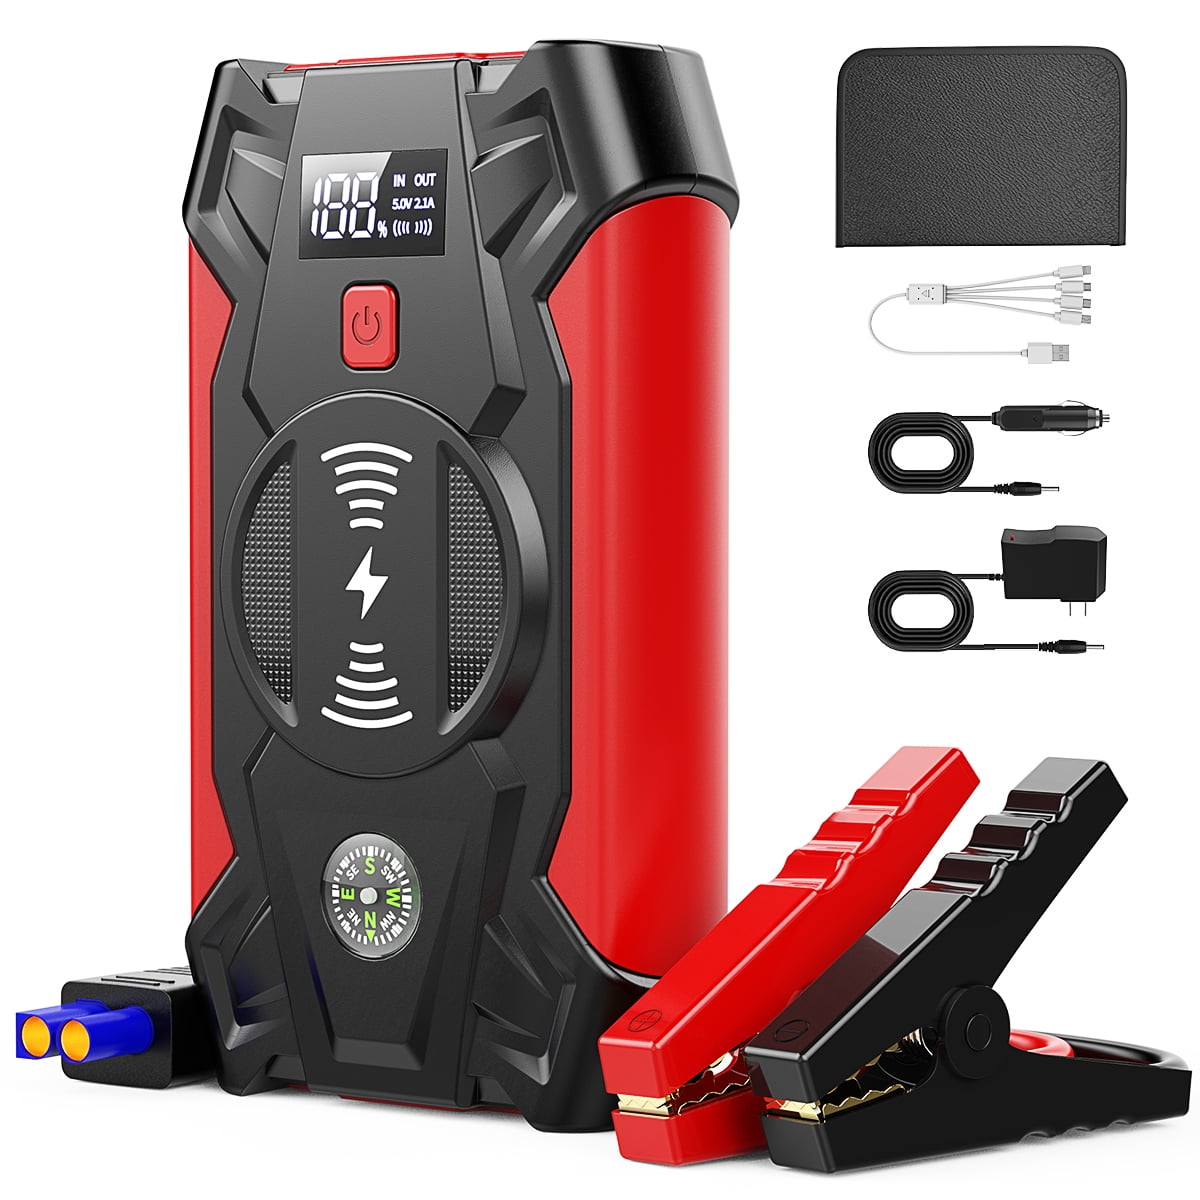 Dropship UTRAI Car Battery Starter, 1600A Peak 16000mAh 12V Car Auto Jump  Starter, Portable Battery Booster With Lithium Jump Box And LED Light  (Model BJ-ZERO-OR) to Sell Online at a Lower Price